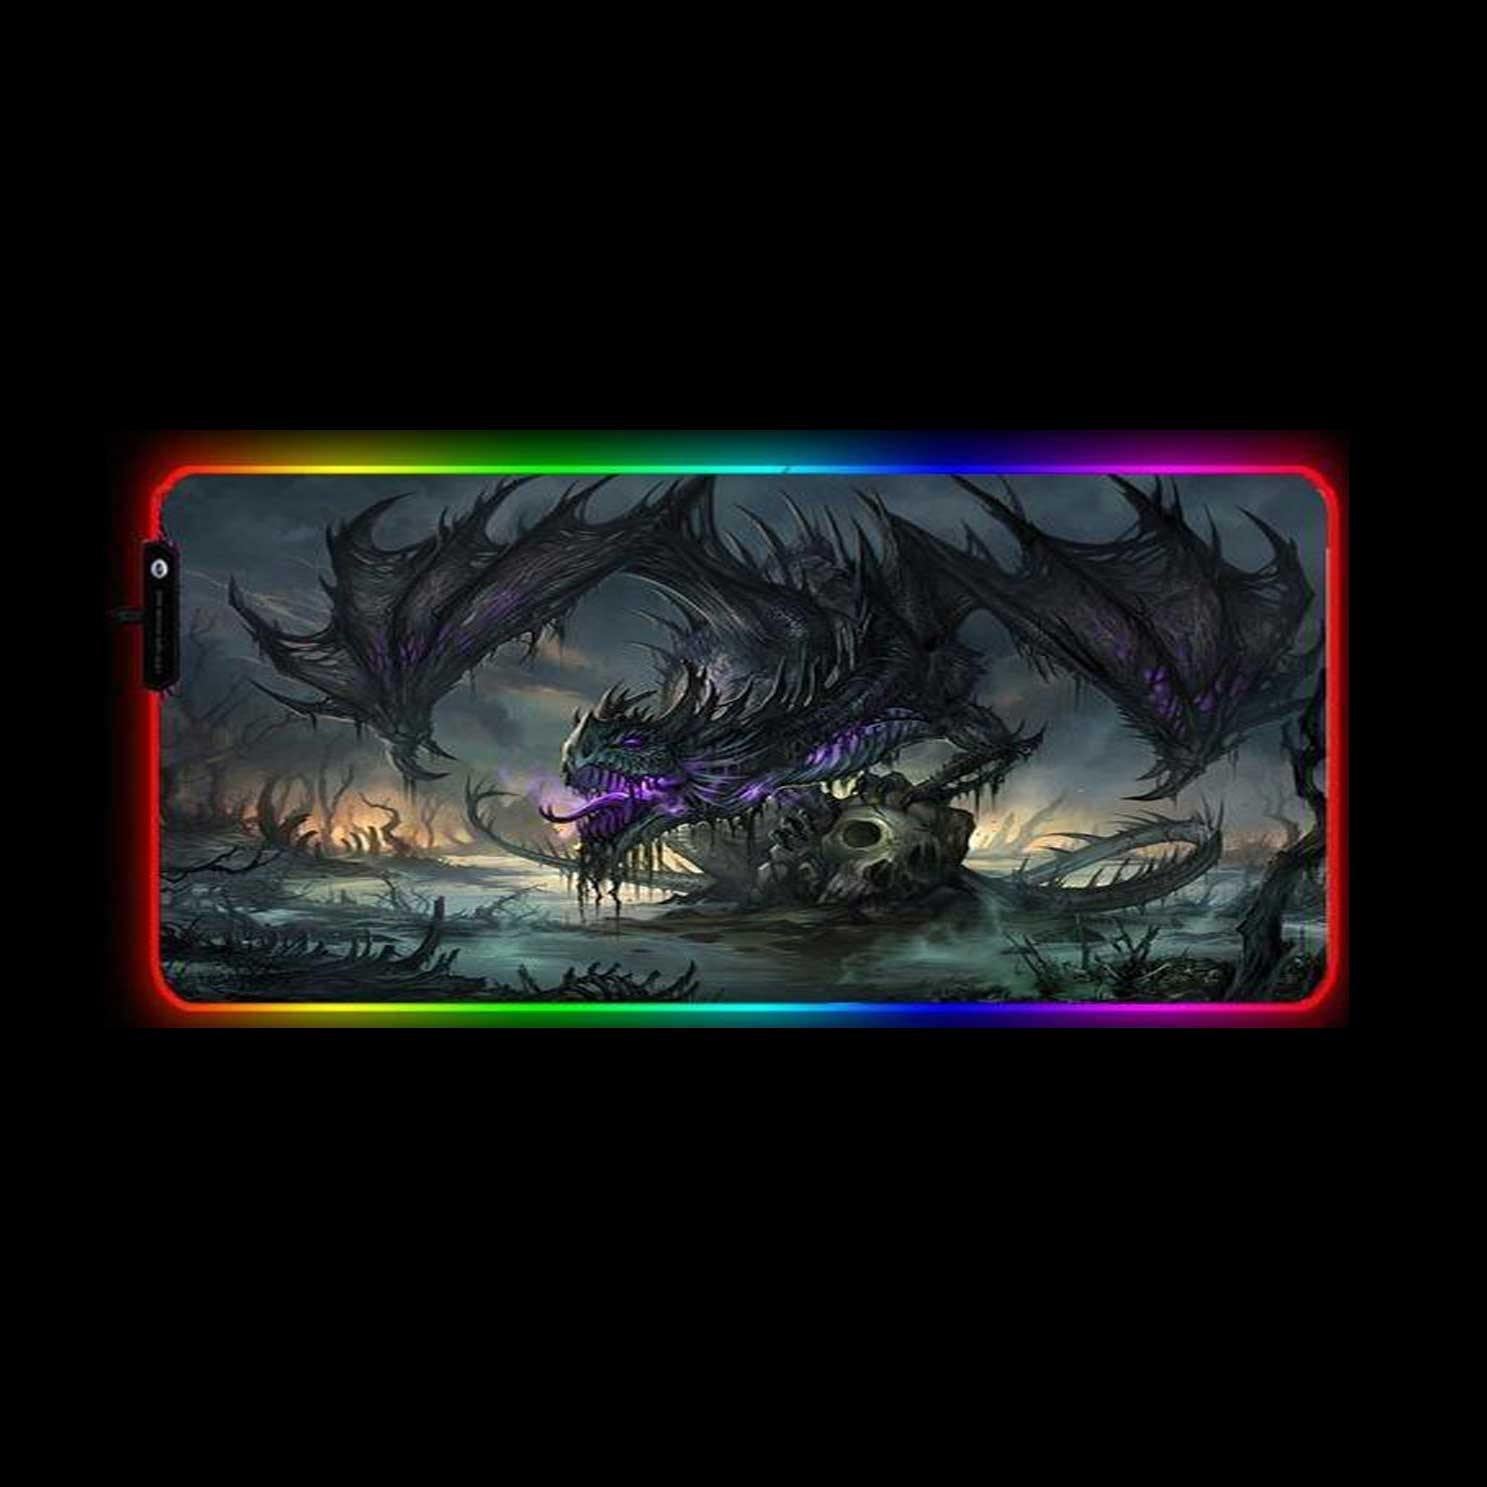 The Dragon RGB LED Mouse Mat - Wyvern's Hoard